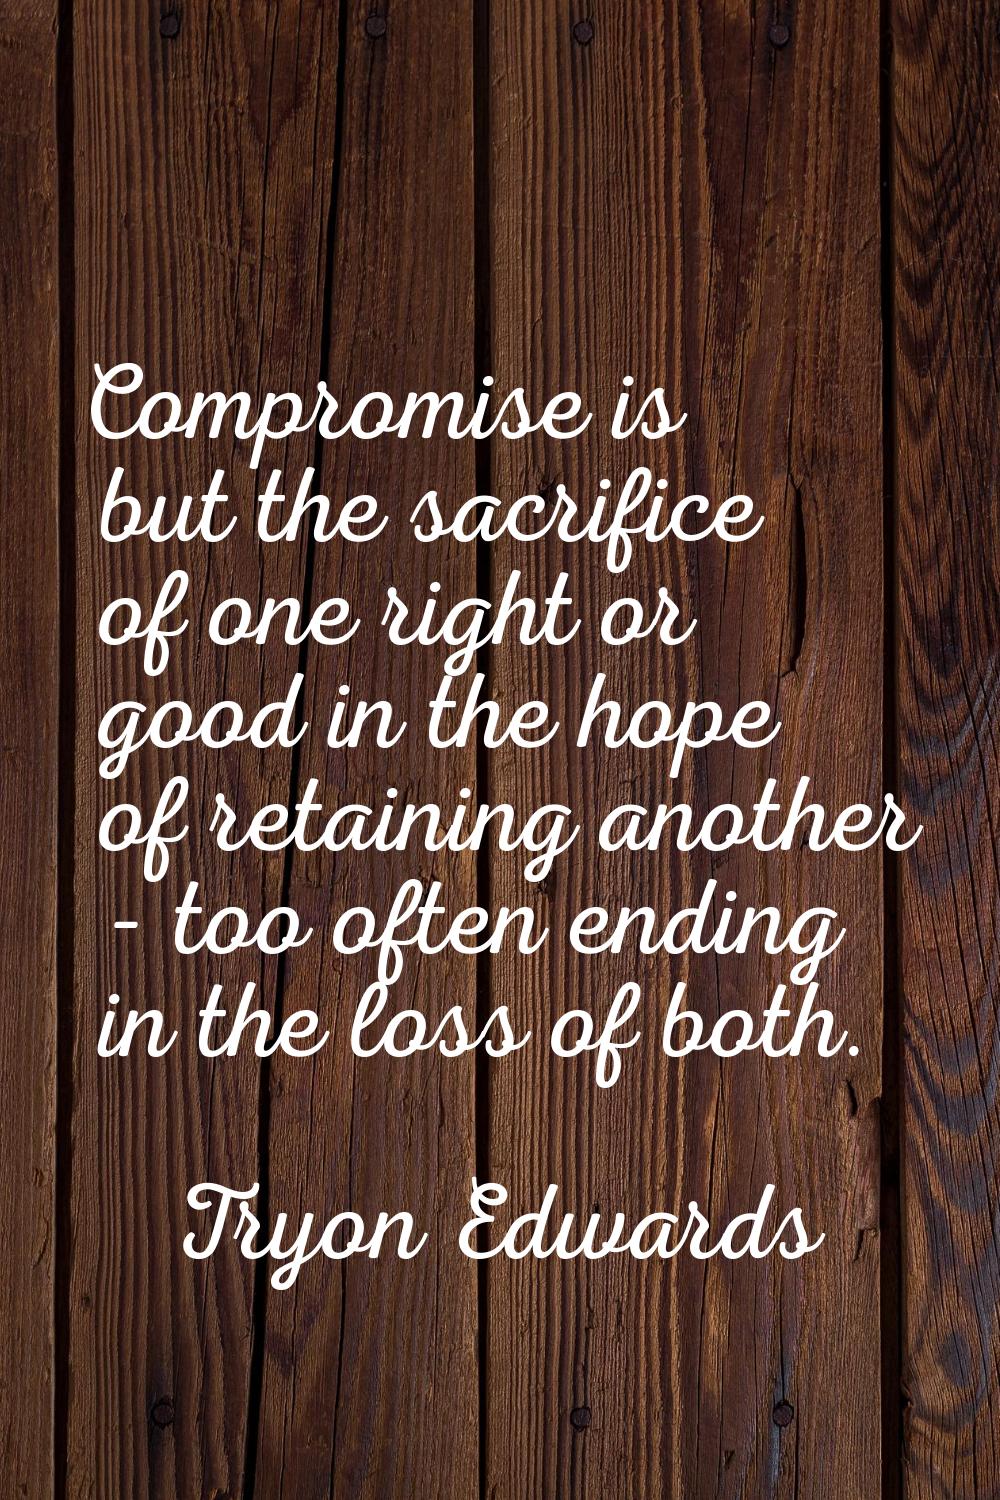 Compromise is but the sacrifice of one right or good in the hope of retaining another - too often e